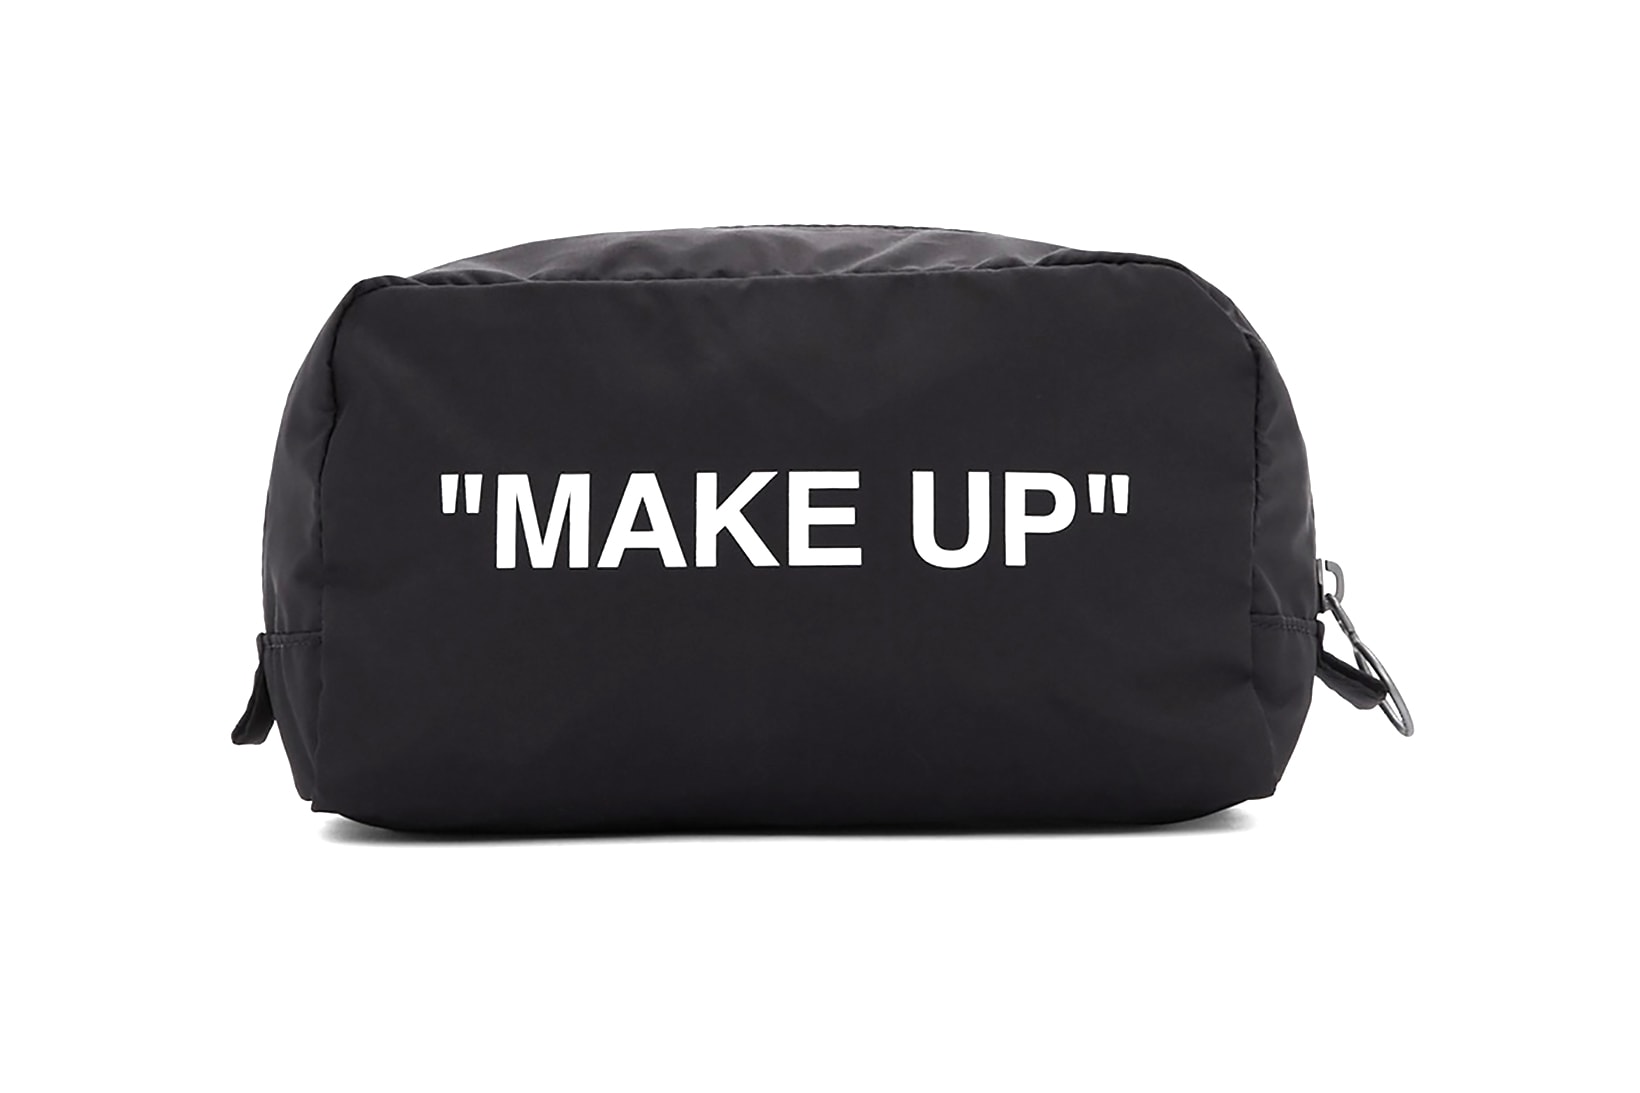 off white makeup pouch black travel bag accessories